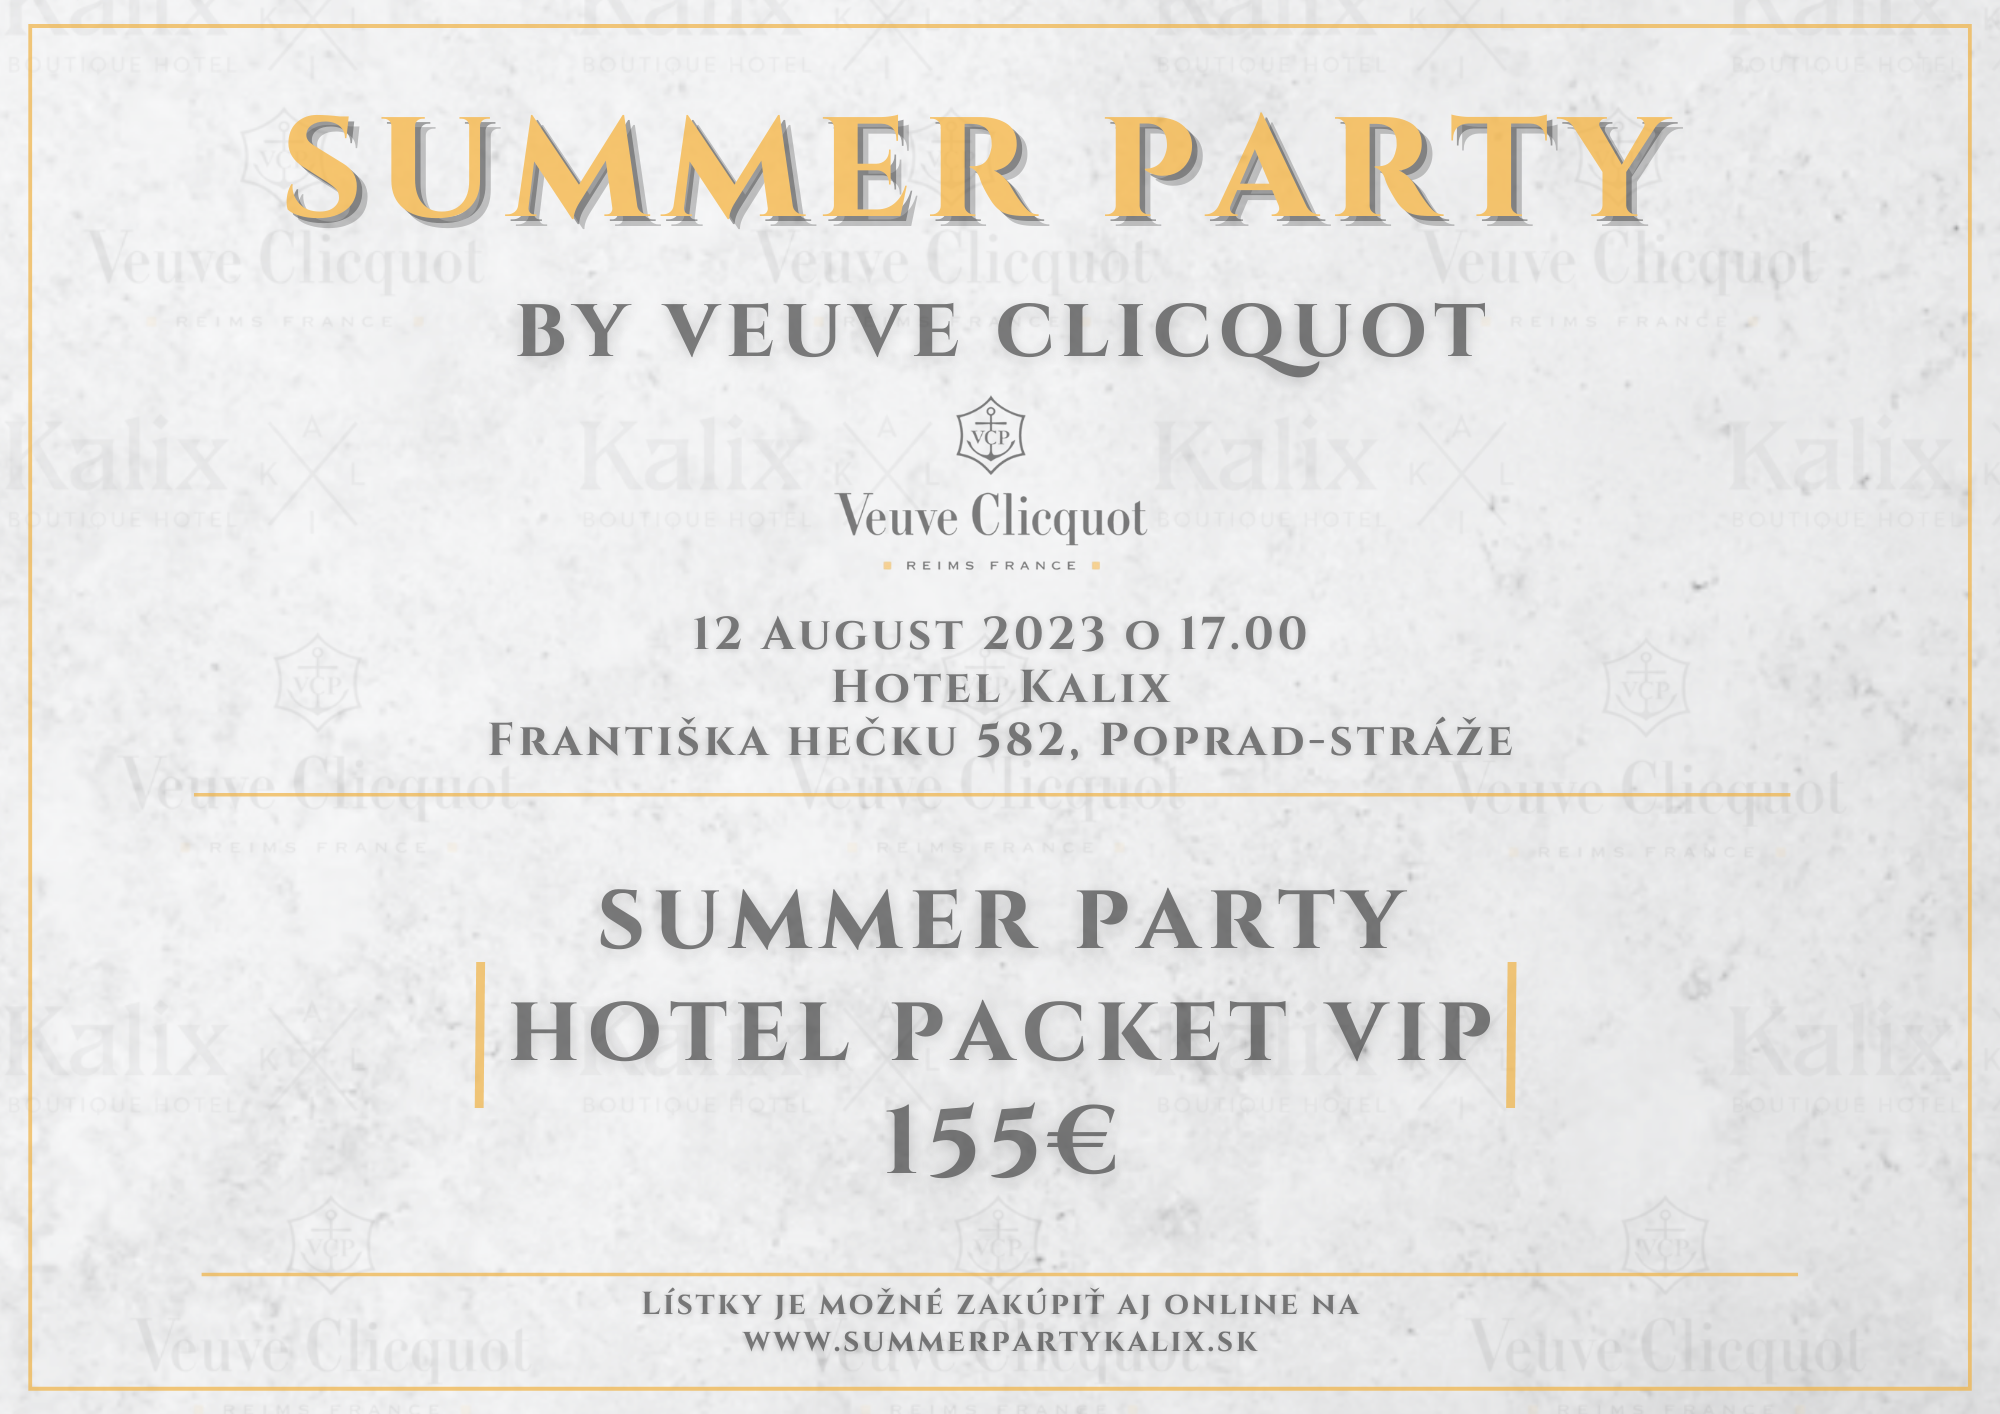 Hotel Packet VIP Summer Party